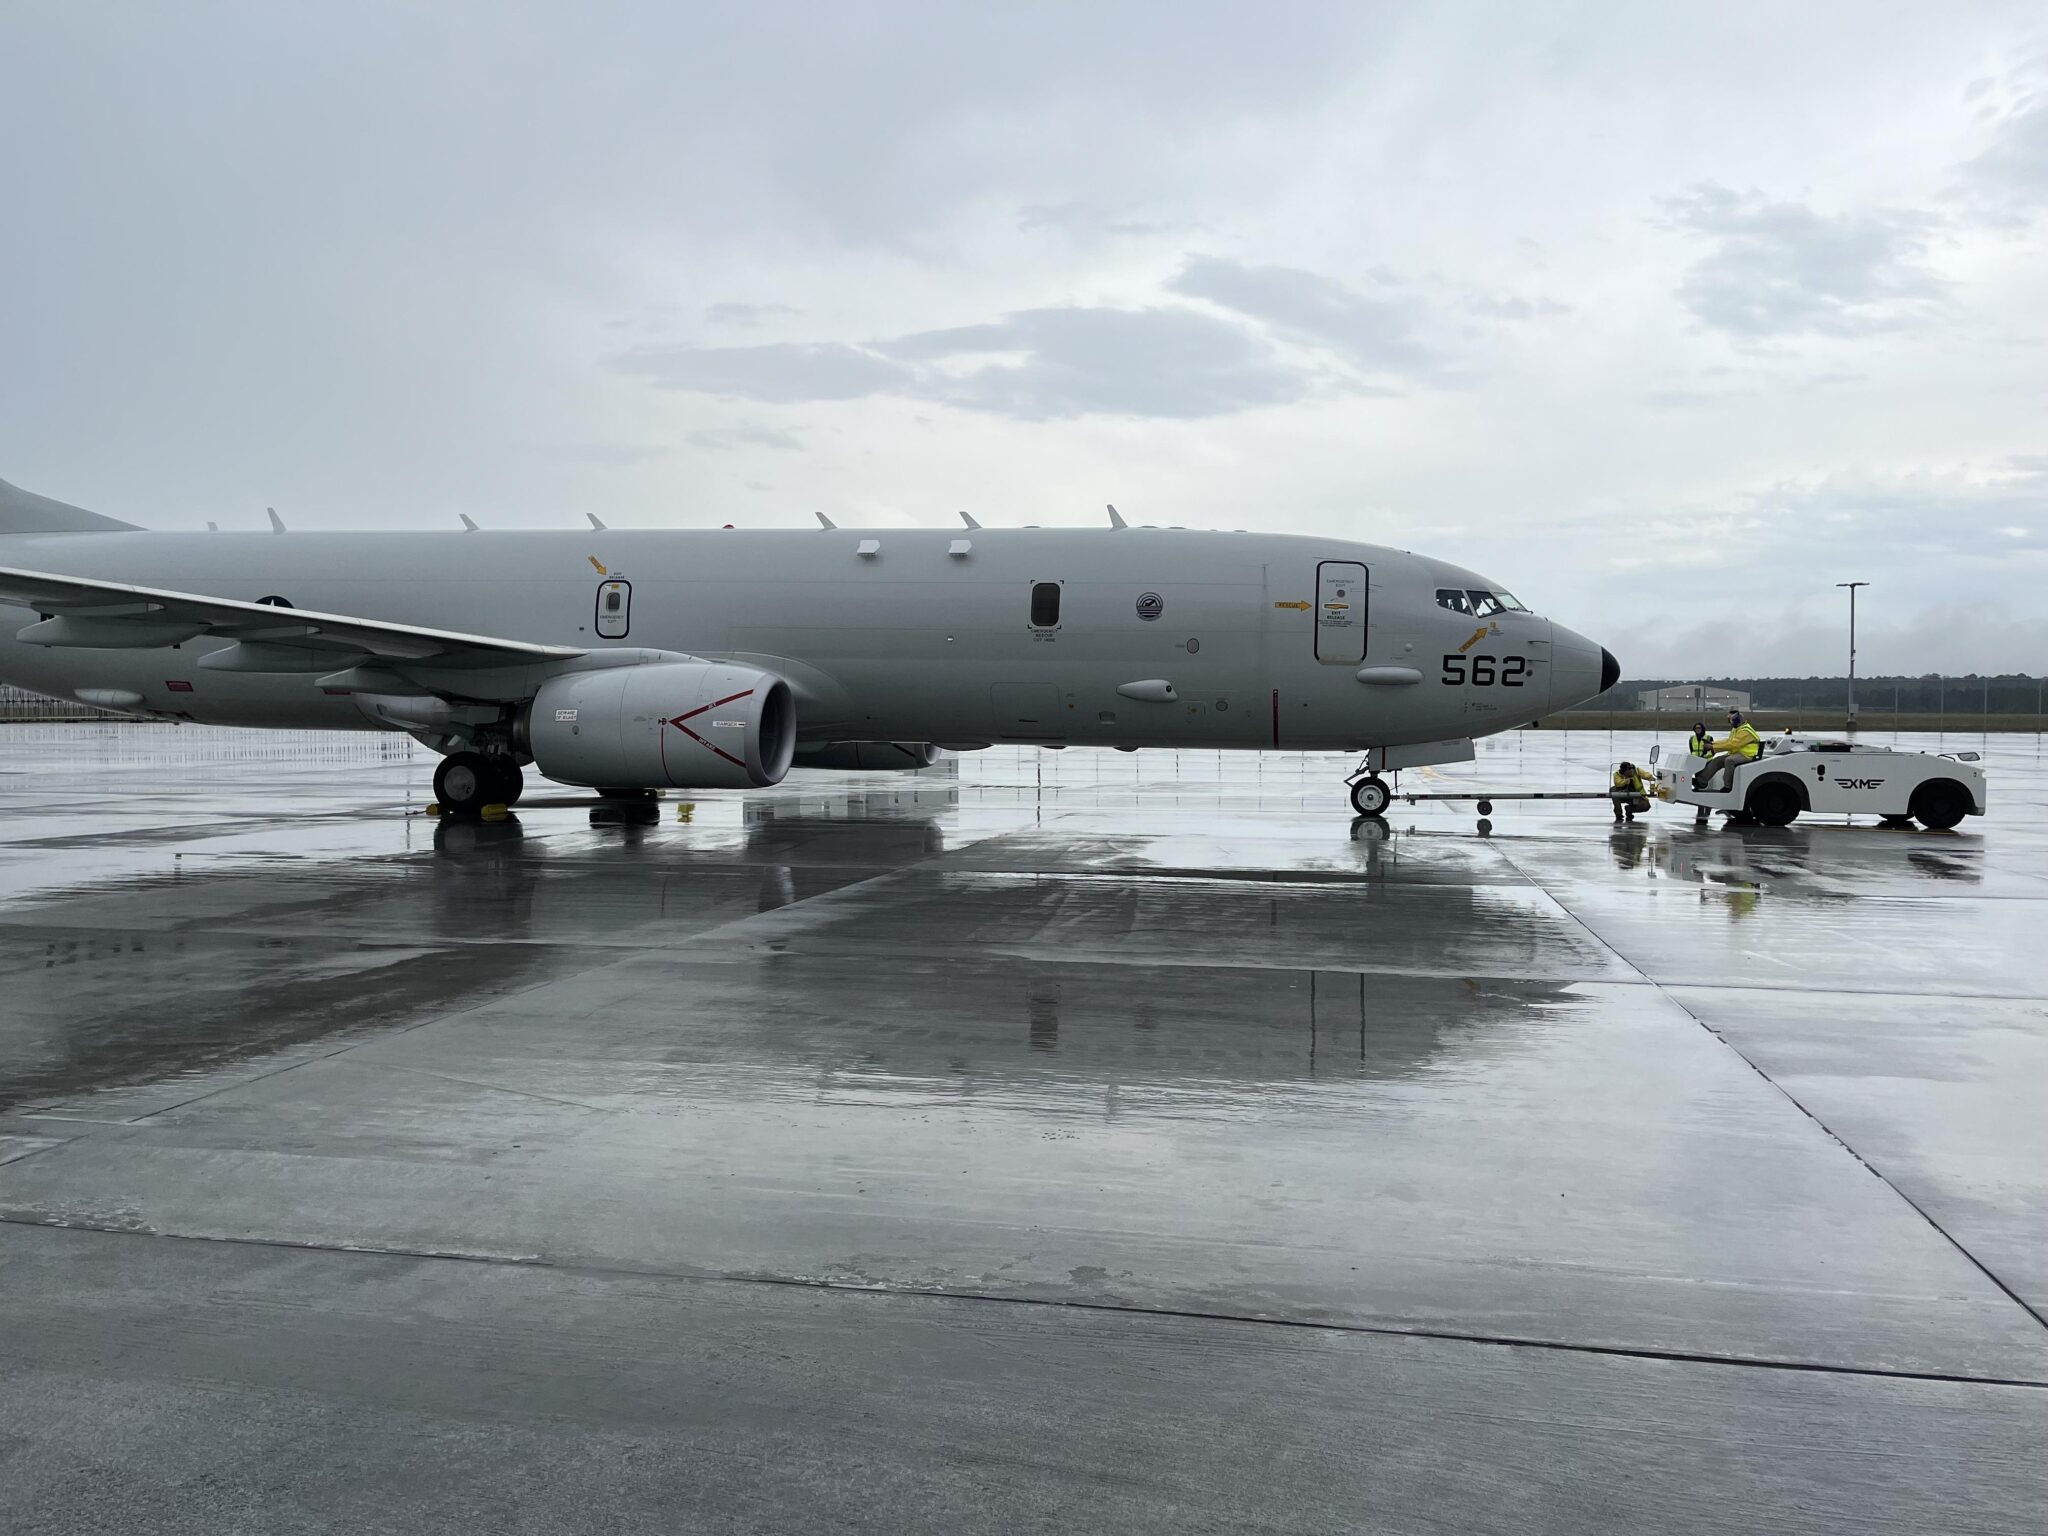 U.S. Navy Delivers First P-8A Poseidon Aircraft for Increment 3 Block 2 Modifications - Seapower